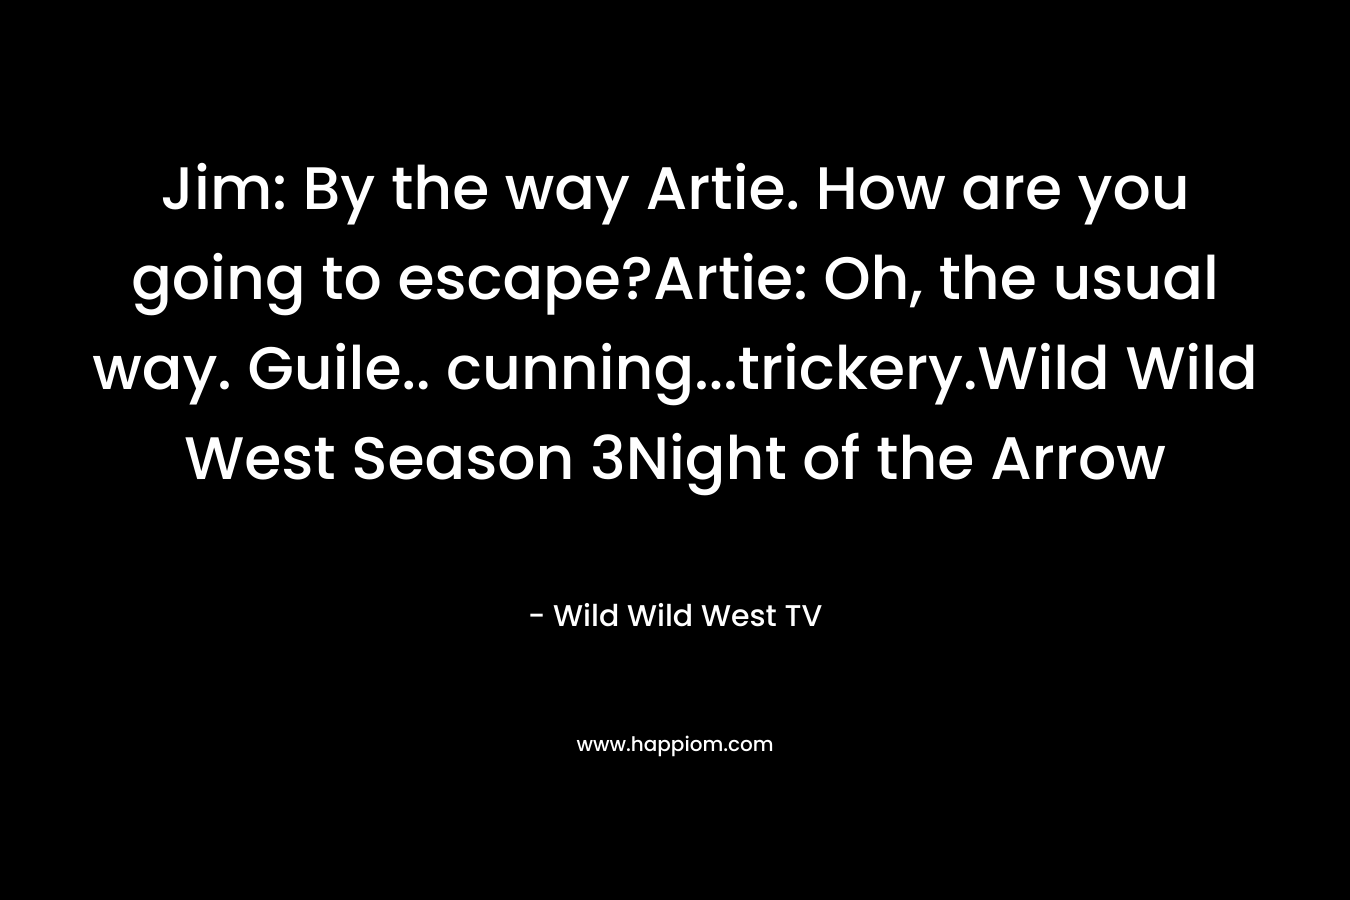 Jim: By the way Artie. How are you going to escape?Artie: Oh, the usual way. Guile.. cunning...trickery.Wild Wild West Season 3Night of the Arrow